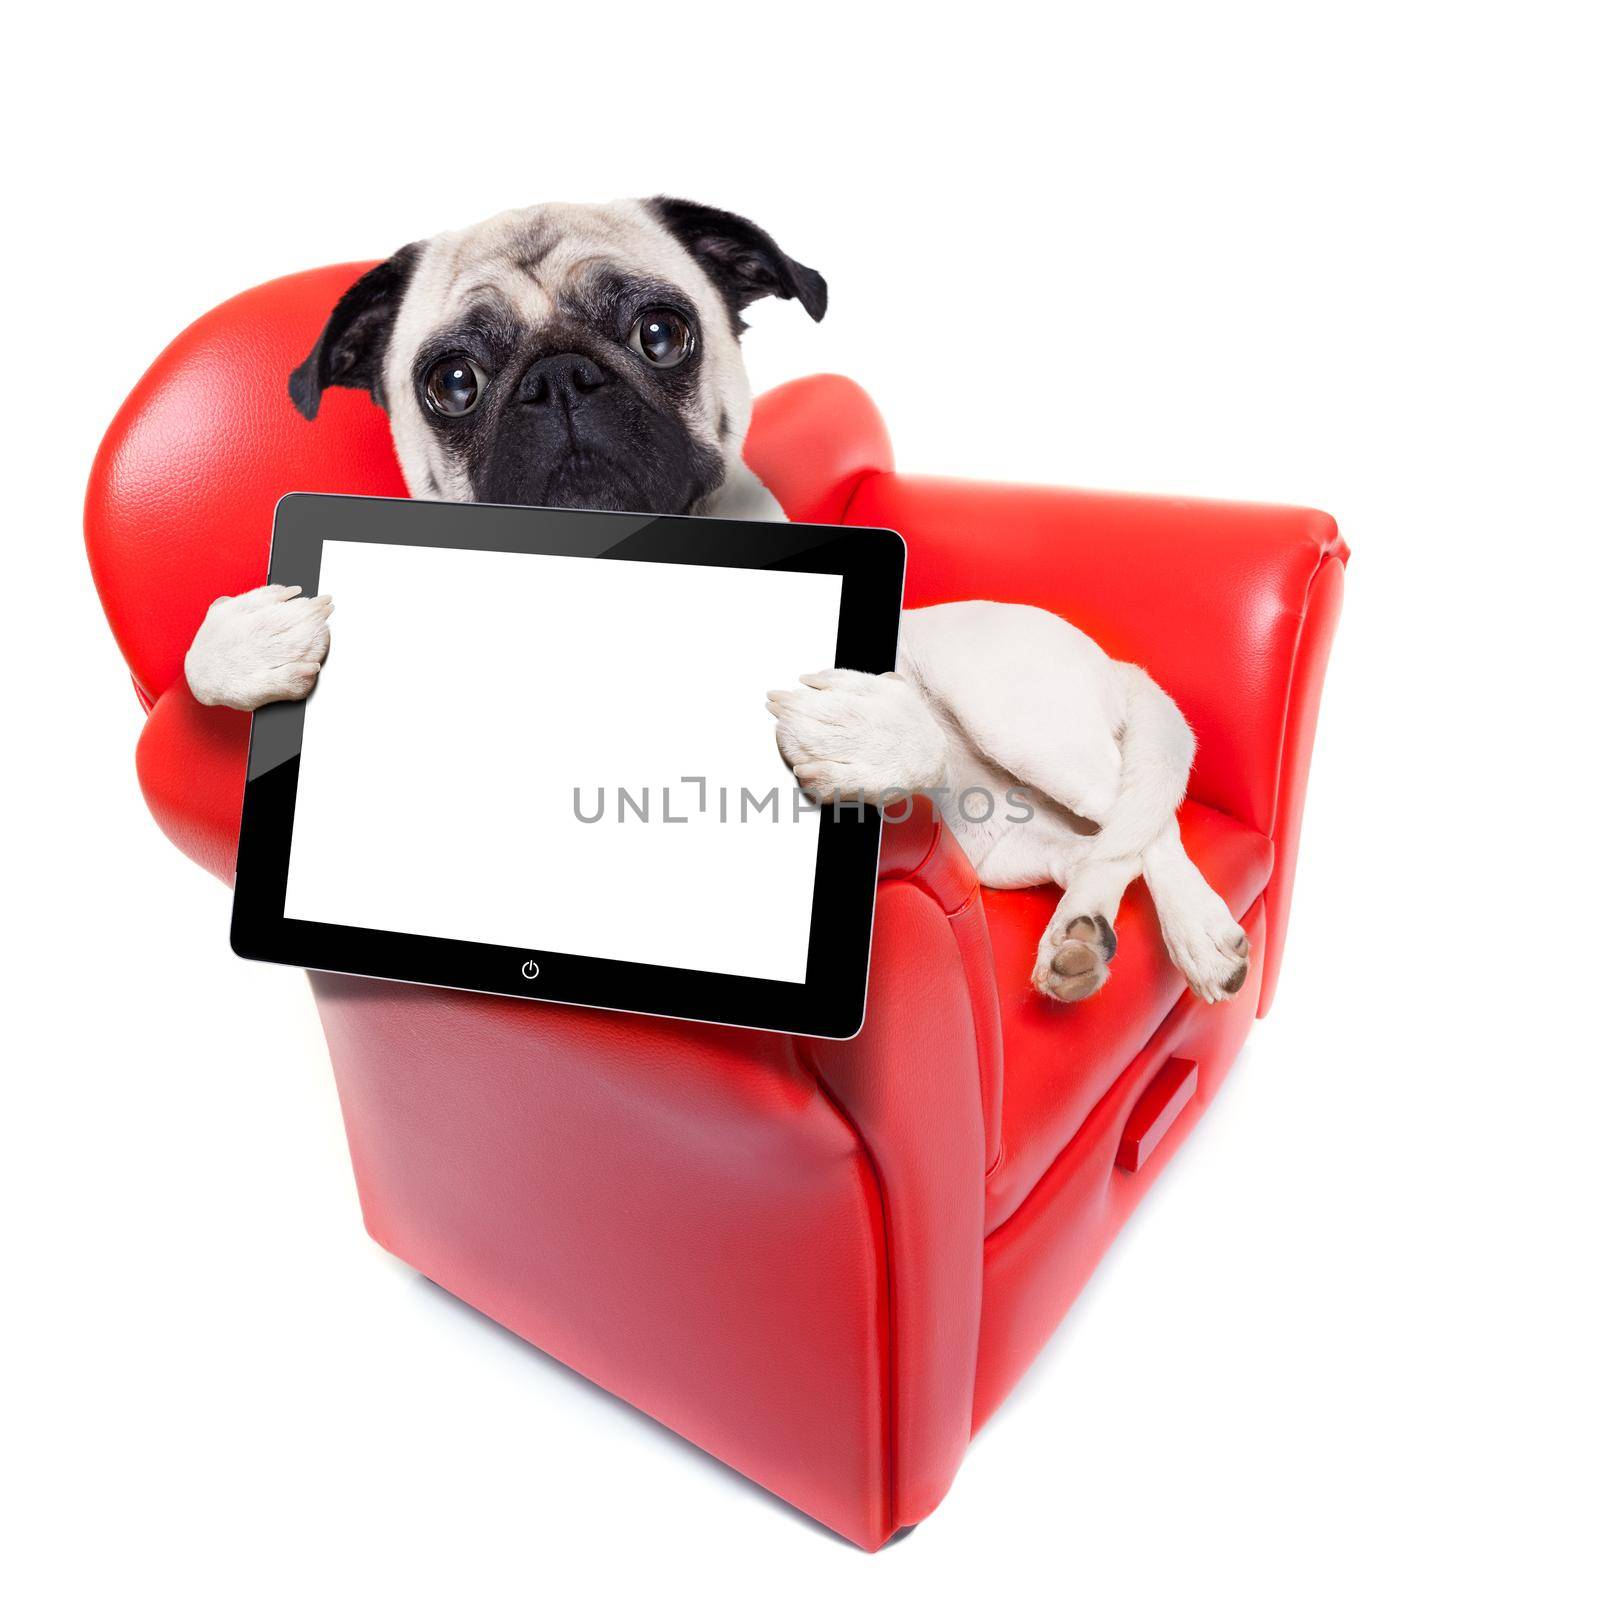 pug dog sitting on red sofa relaxing and resting while holding a tablet pc computer screen or digital display , isolated on white background